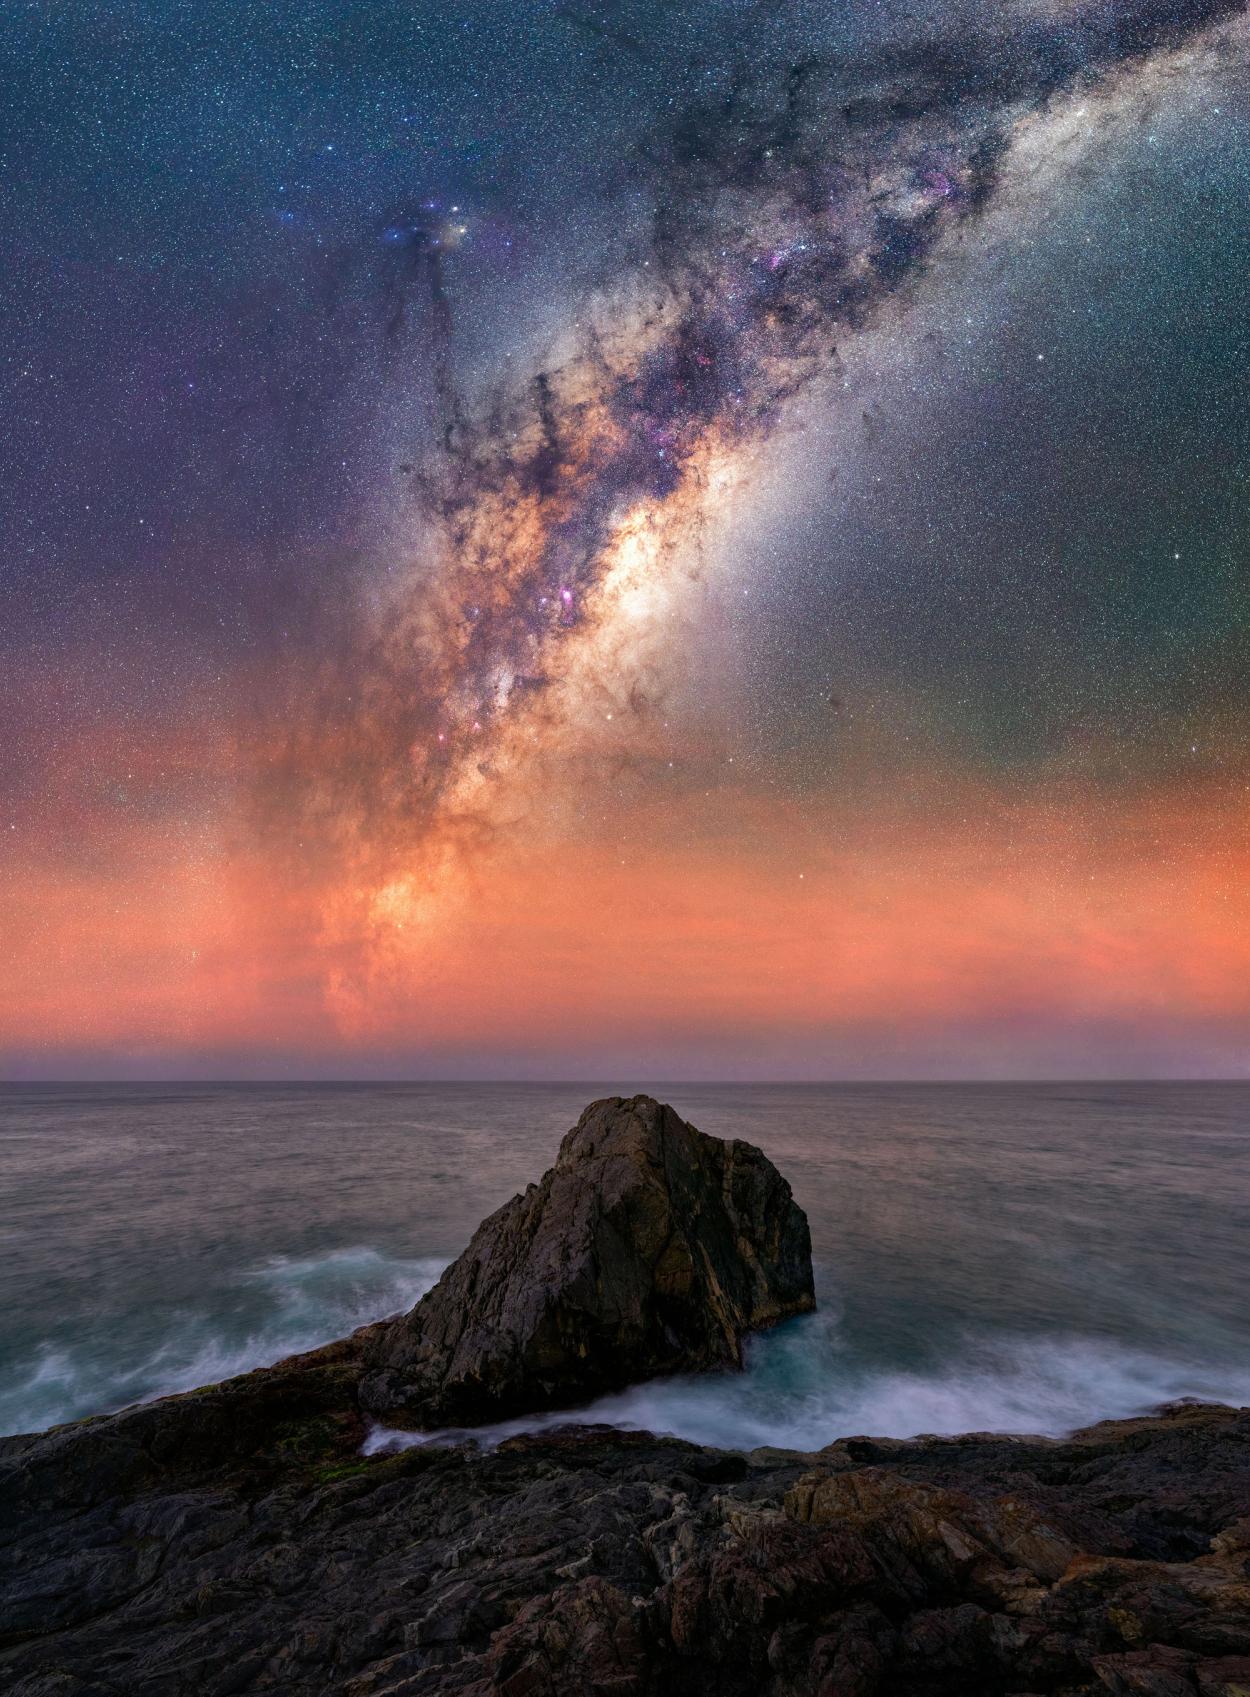 Stars arching atop the ocean